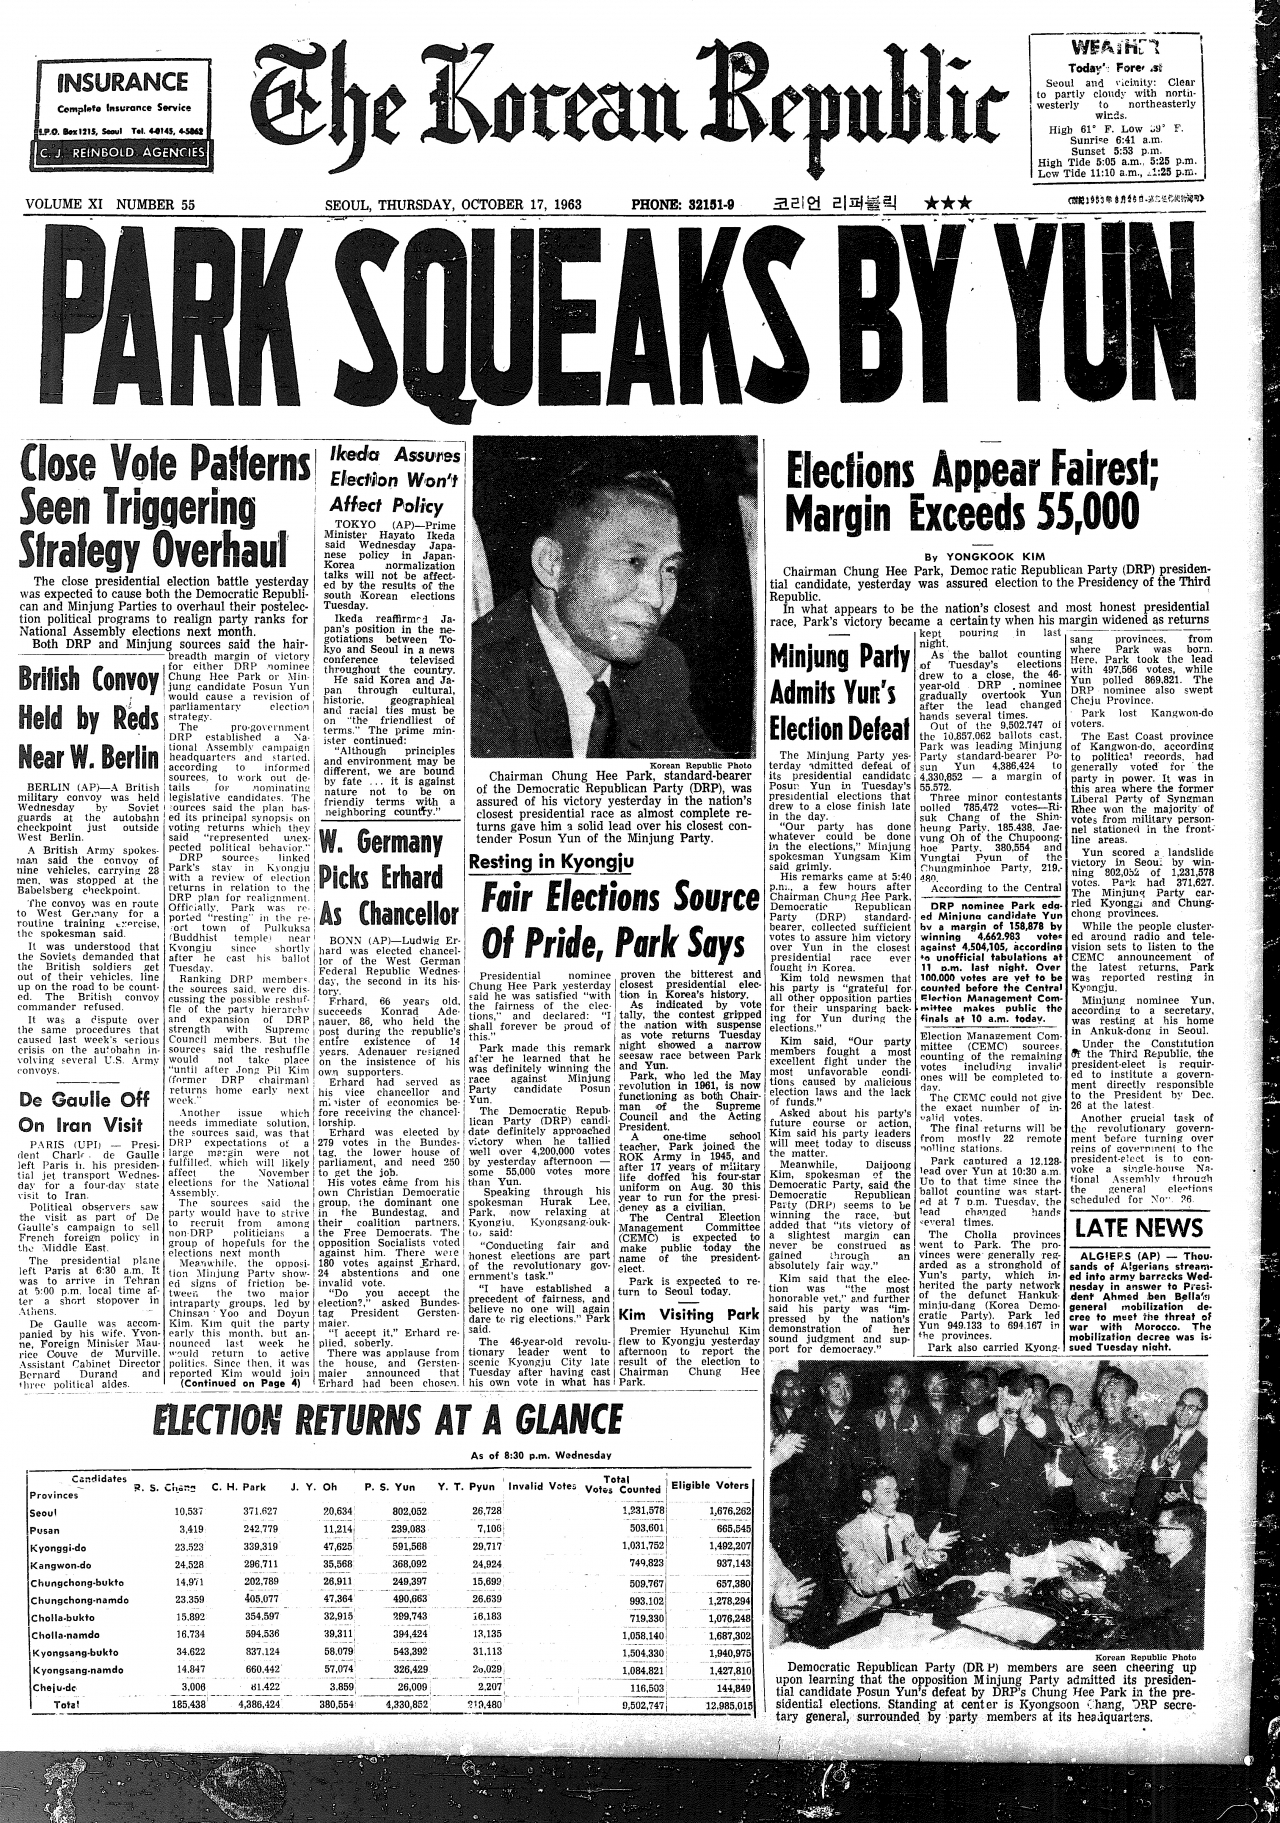 This edition of The Korean Republic Oct.17, 1963 shows the stories related to Park Chung-hee's win over Yun Po-sun in the presidential election. (The Korea Herald)